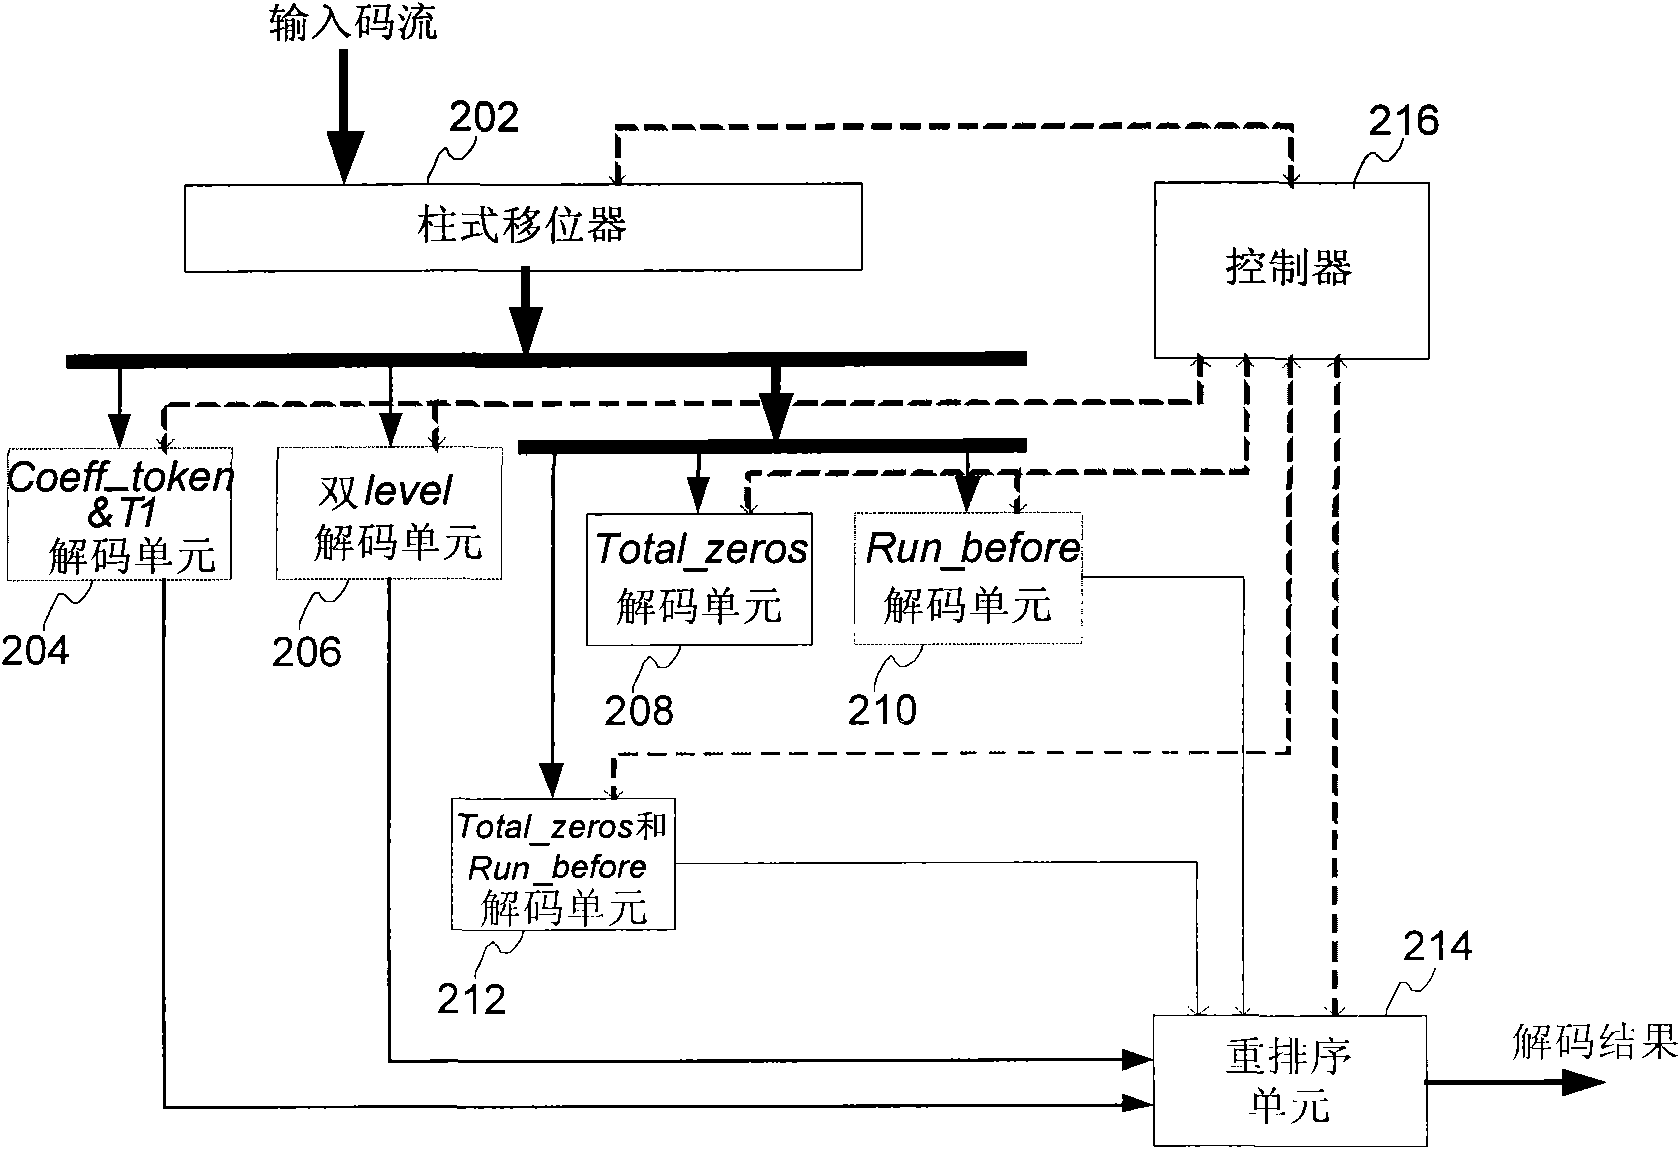 CAVLC decoding method and system